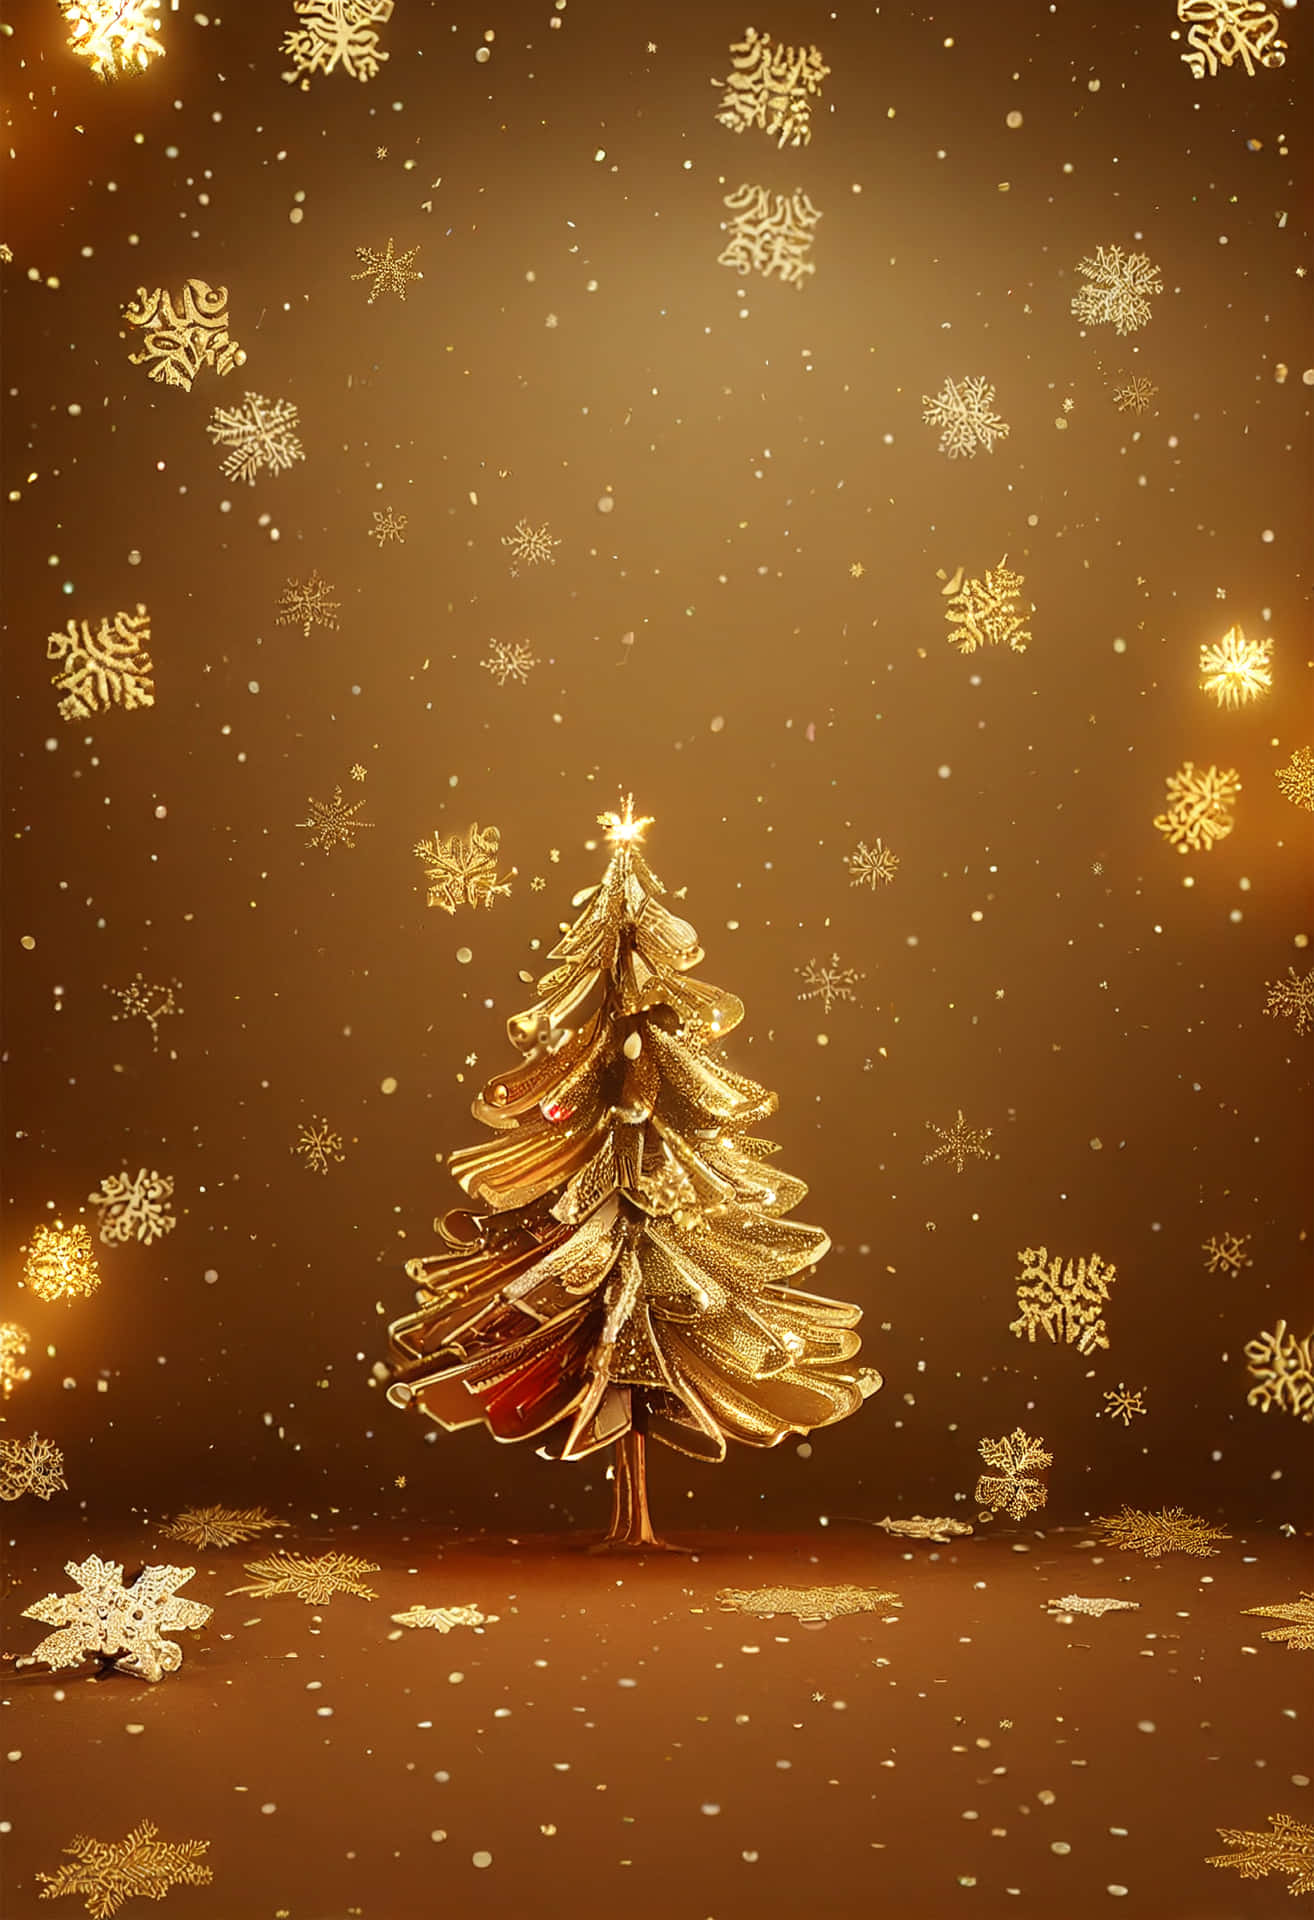 A Golden Christmas Tree On A Brown Background Wallpaper